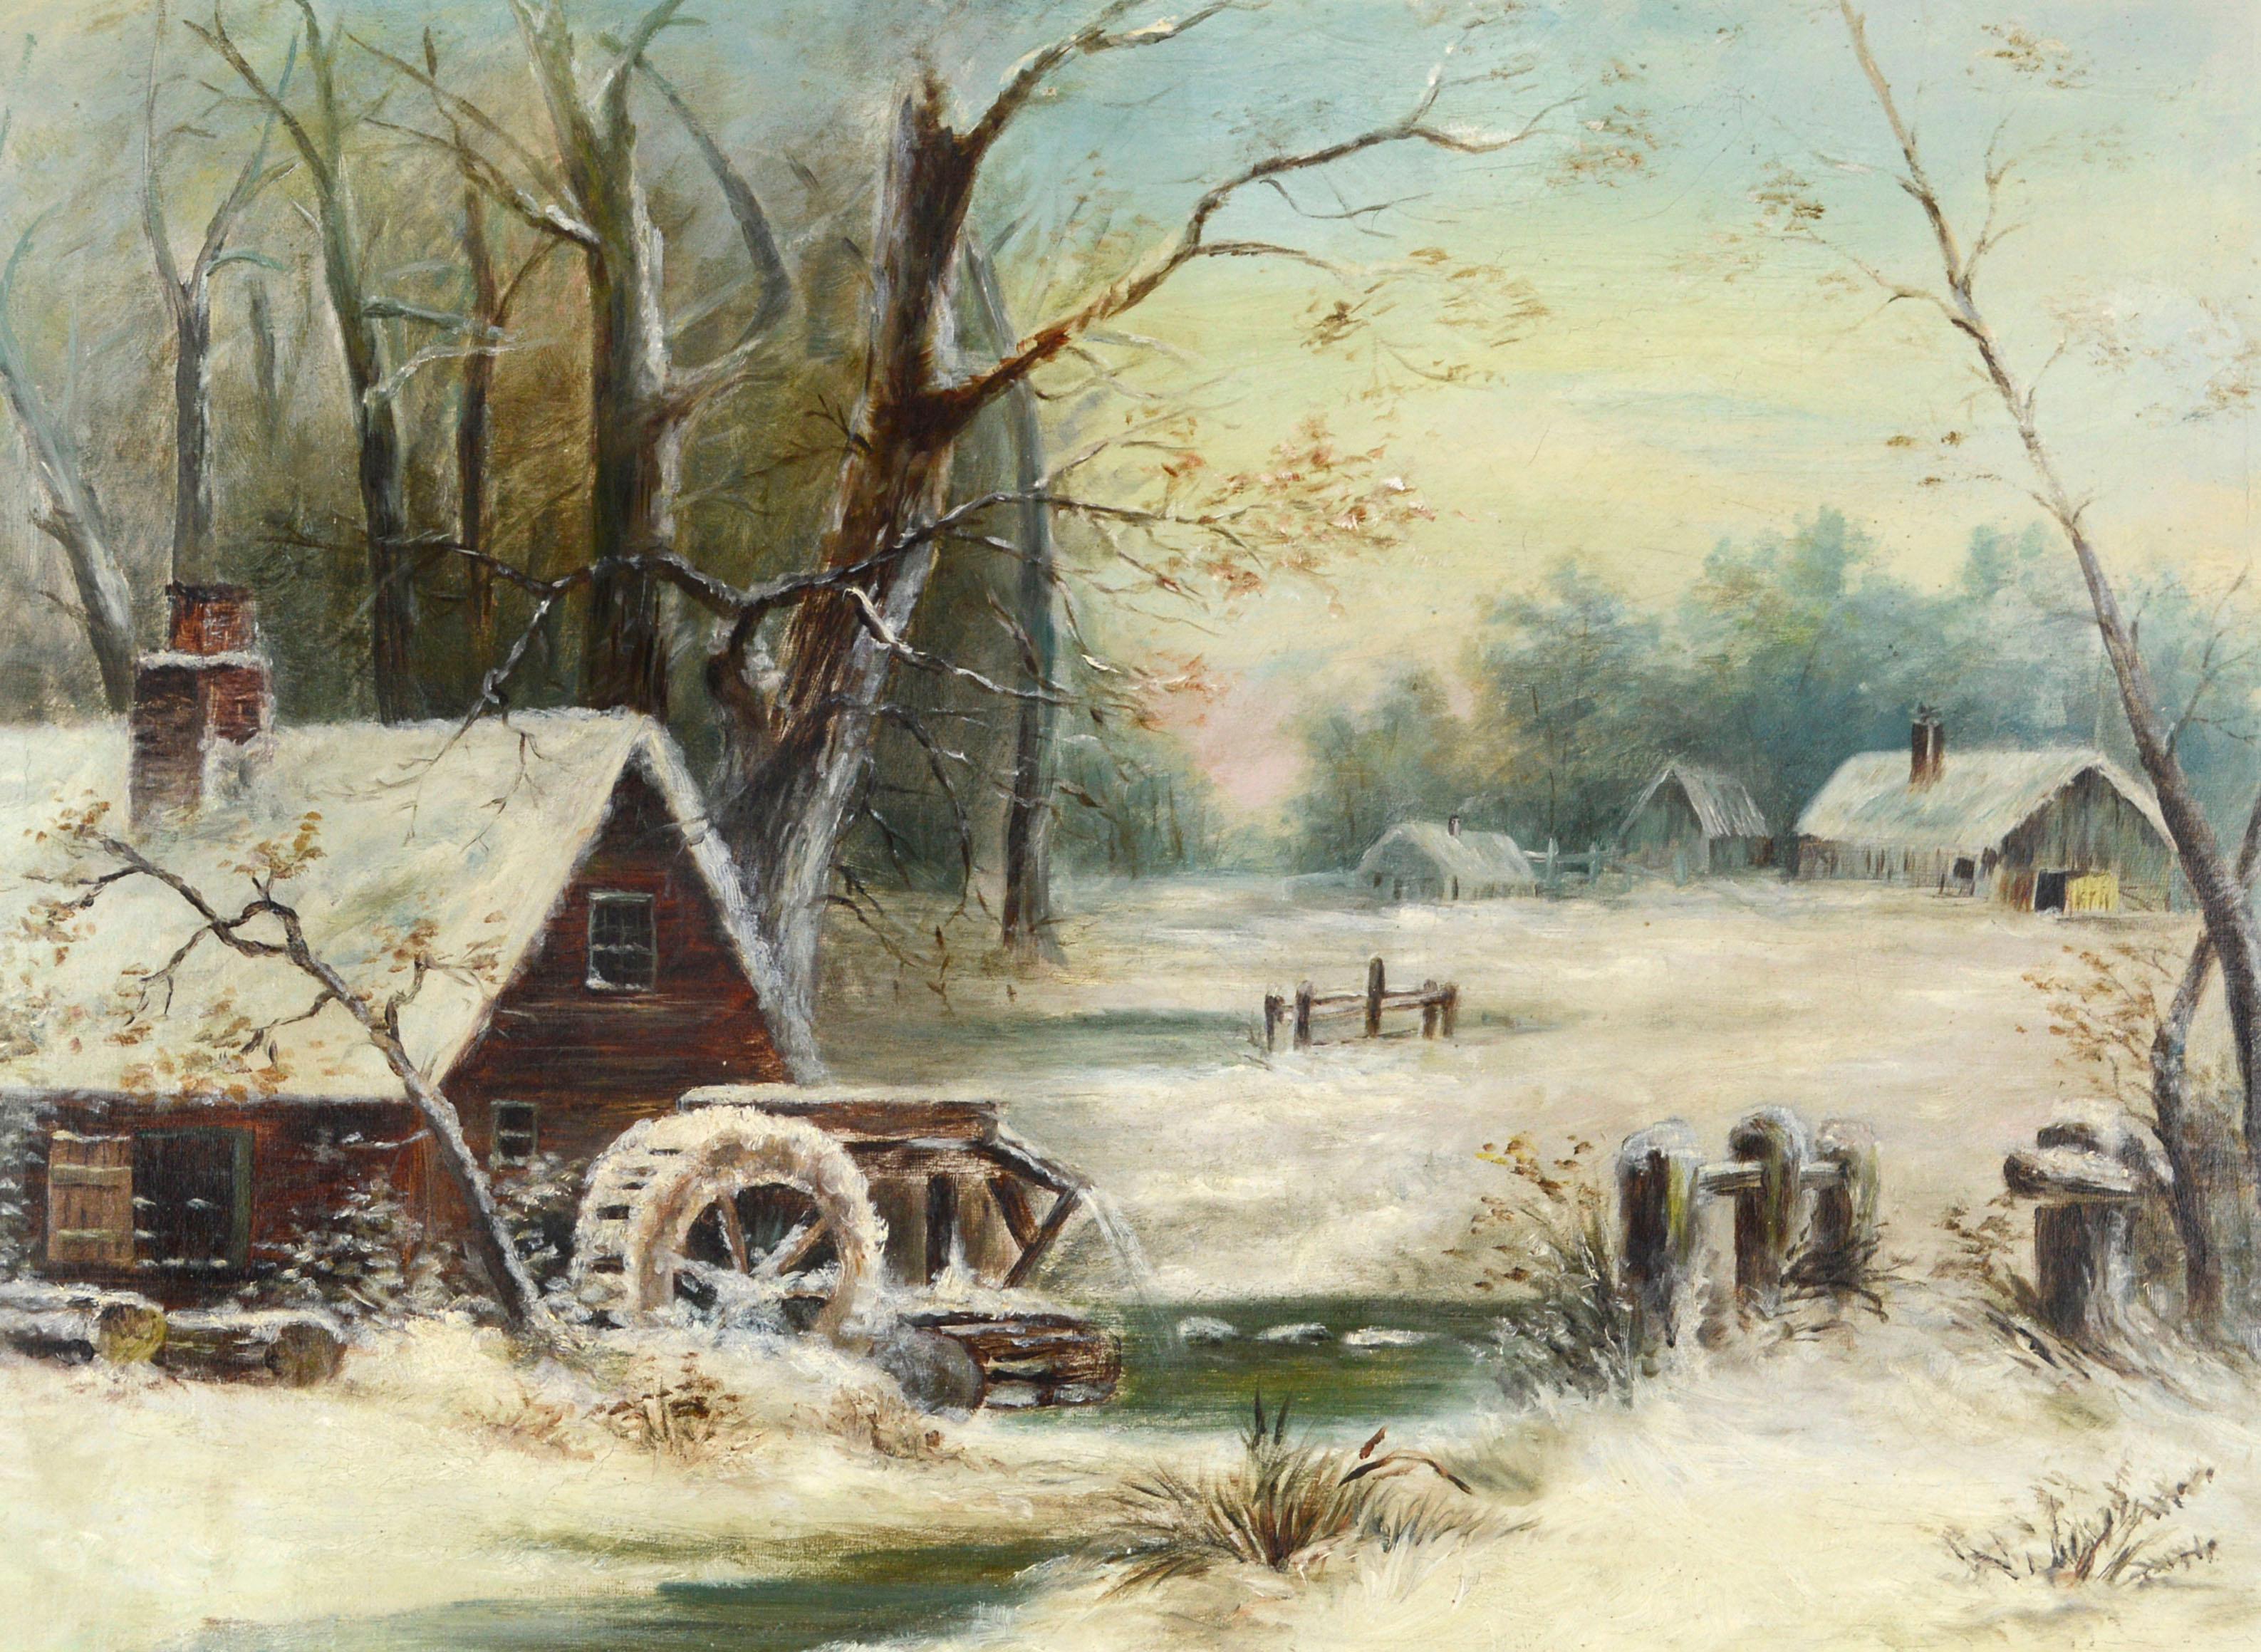 Grist Mill In the Snow - Early 20th Century Winter American Landscape  - Painting by Unknown